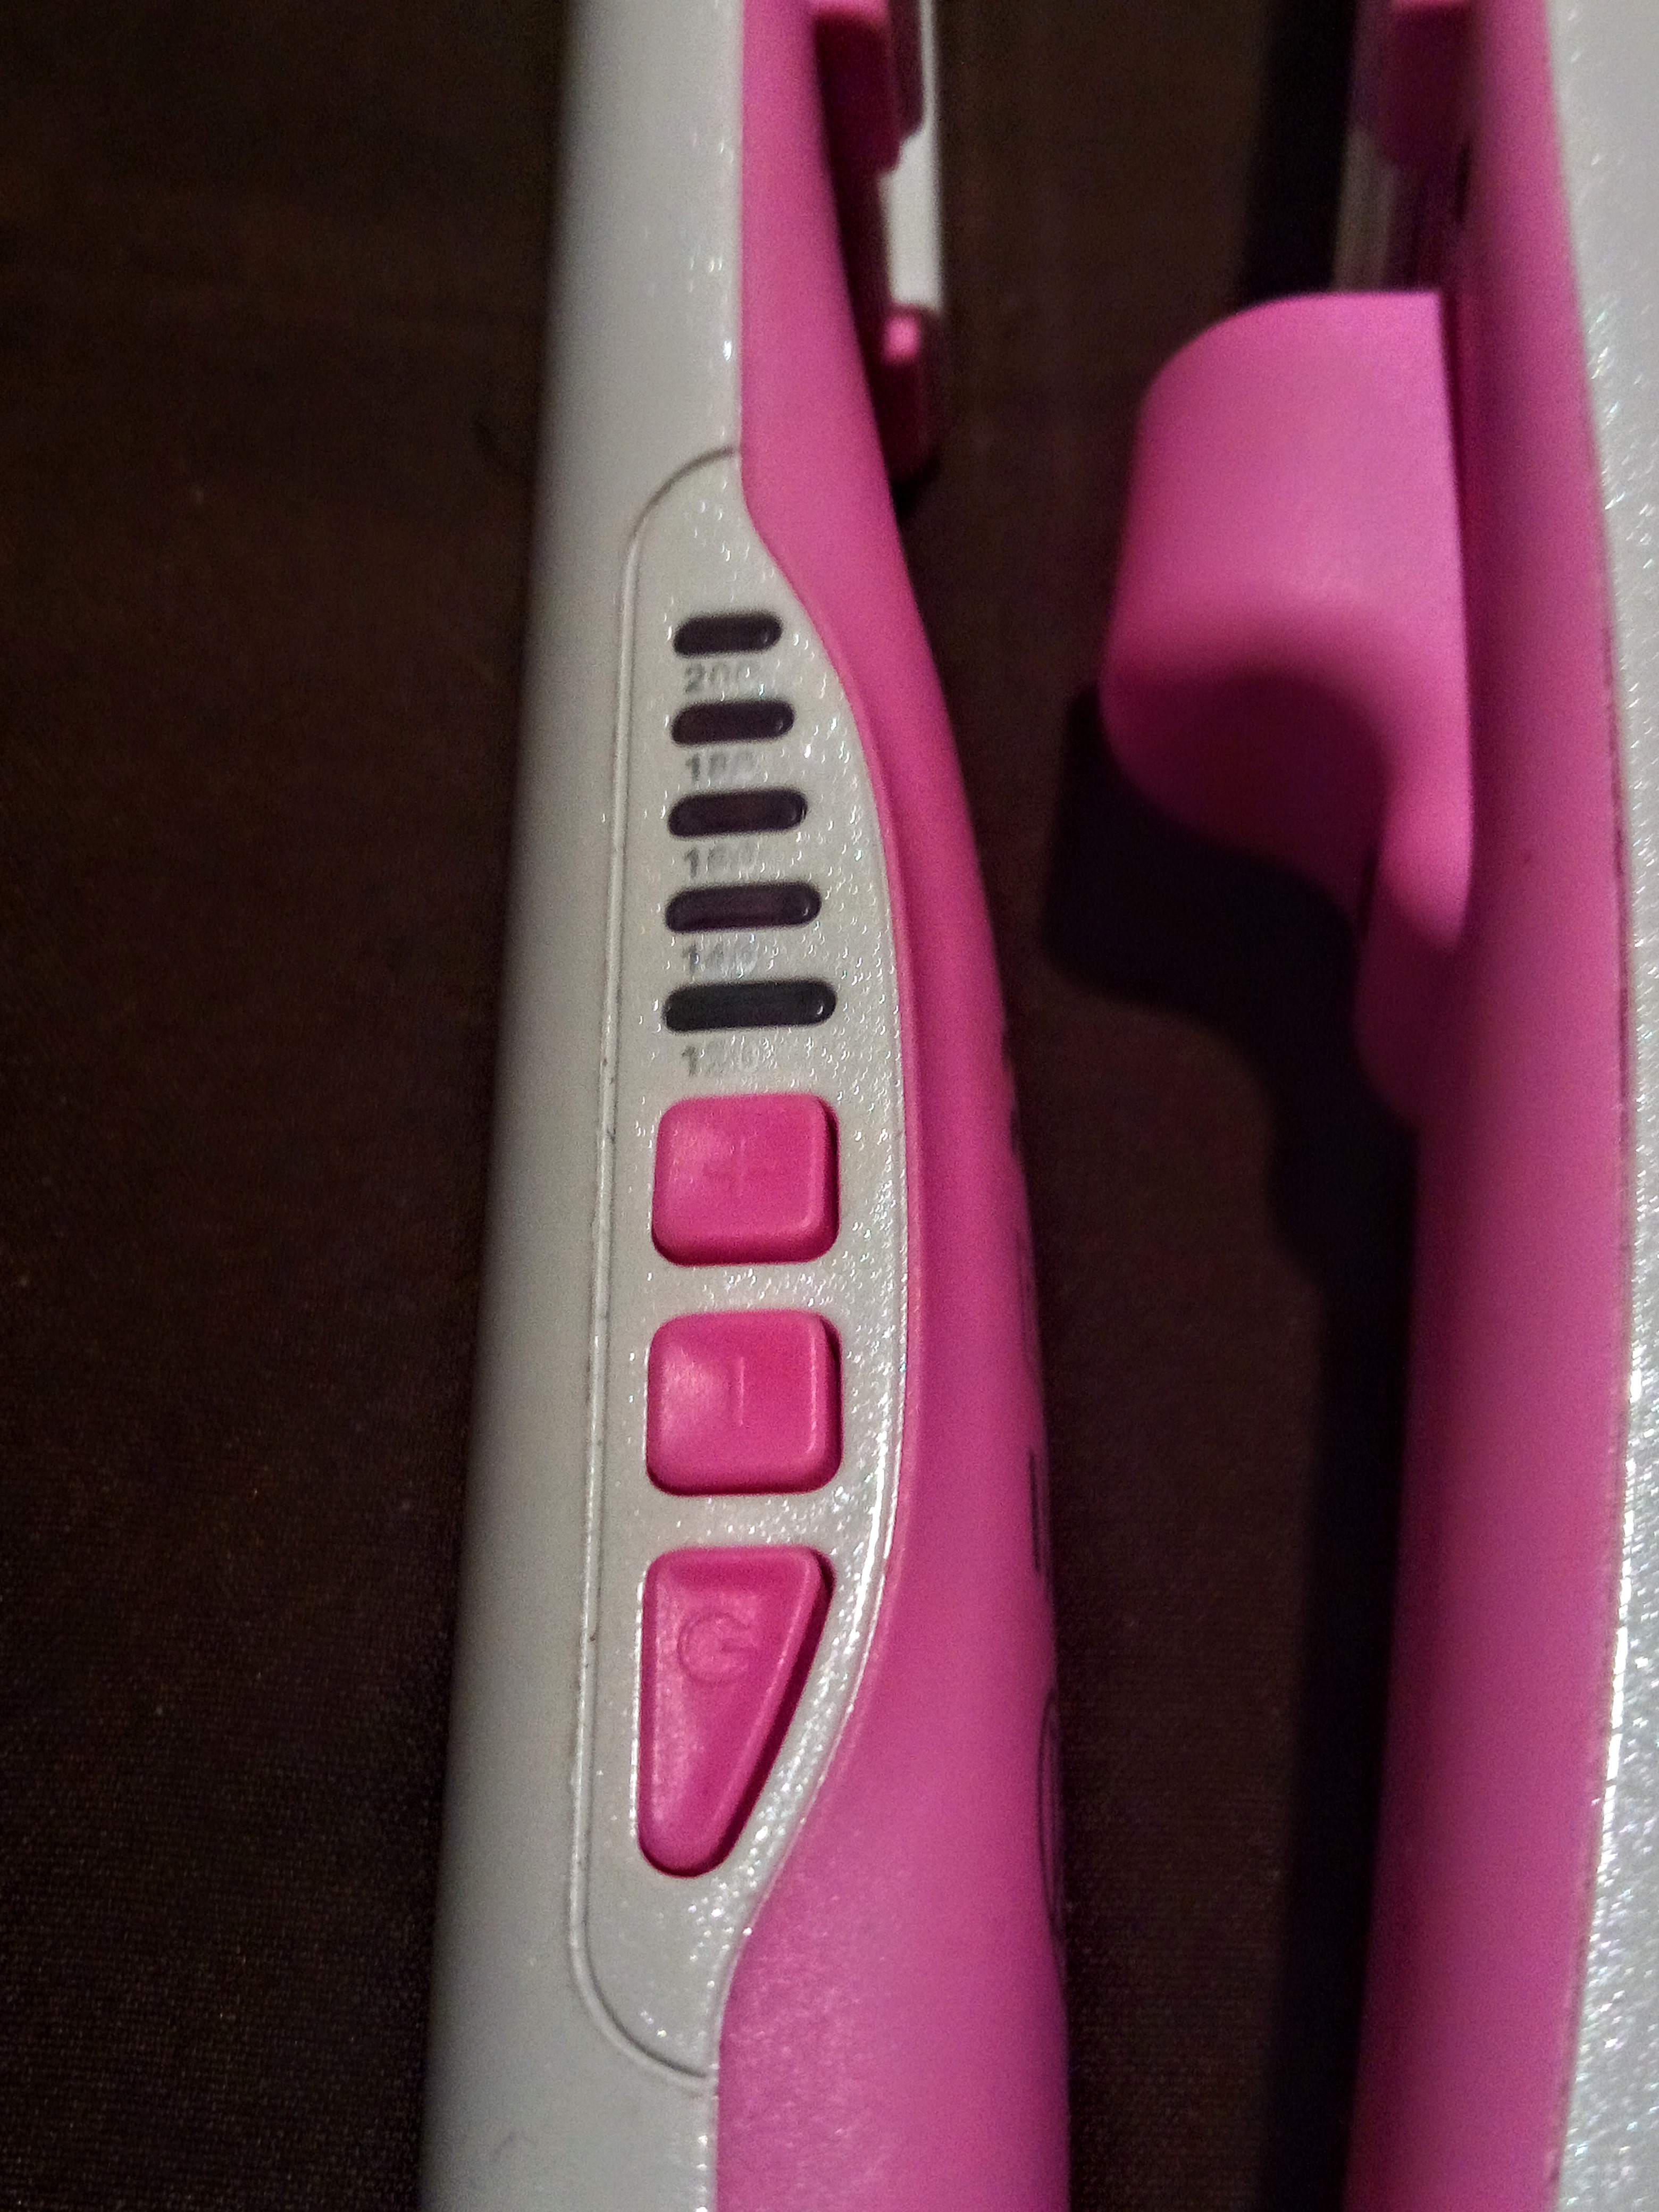 Straightens without Damage!